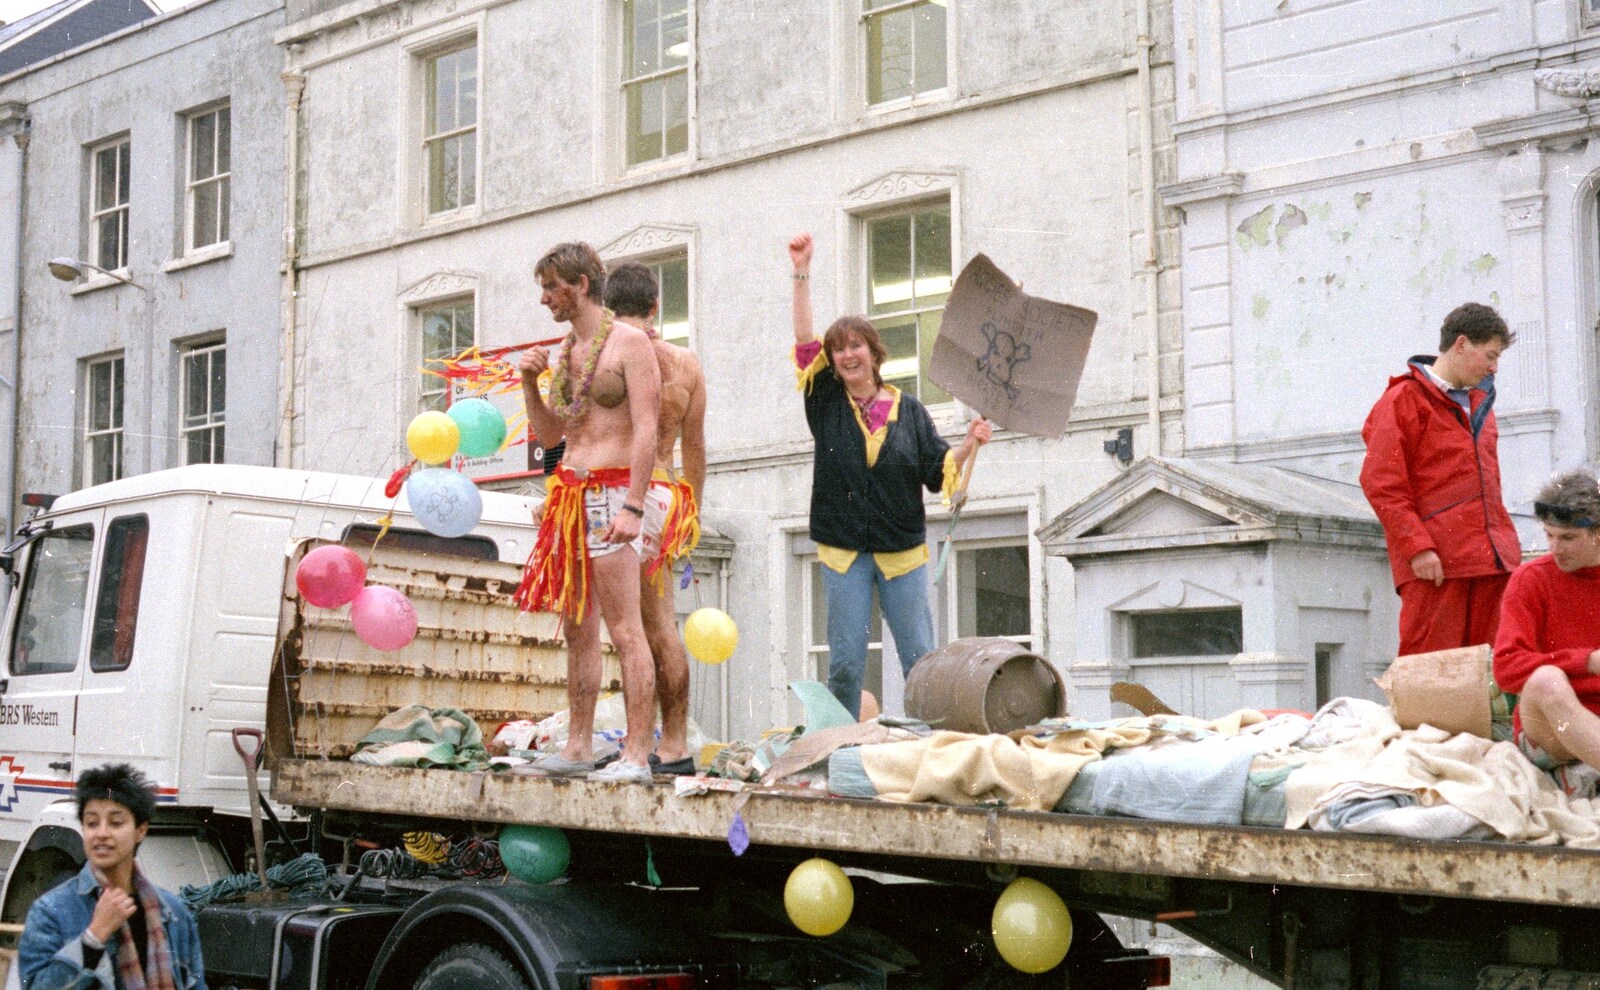 The Aggies Society float by Portland Villas from Uni: The PPSU Pirate RAG Parade, Plymouth, Devon - 14th February 1987